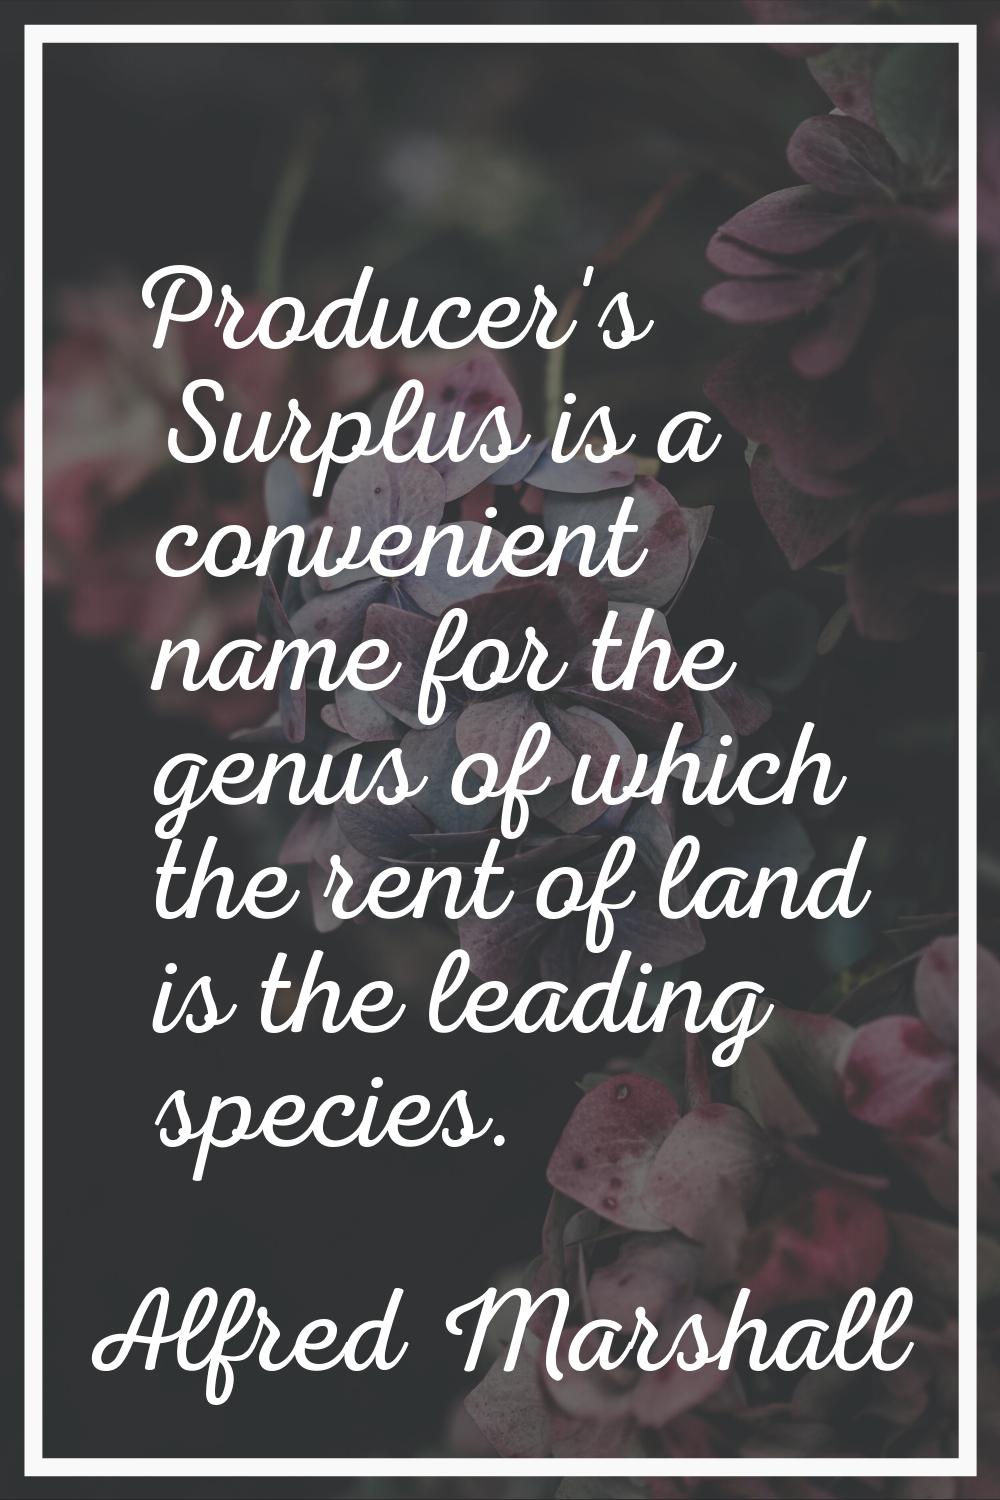 Producer's Surplus is a convenient name for the genus of which the rent of land is the leading spec